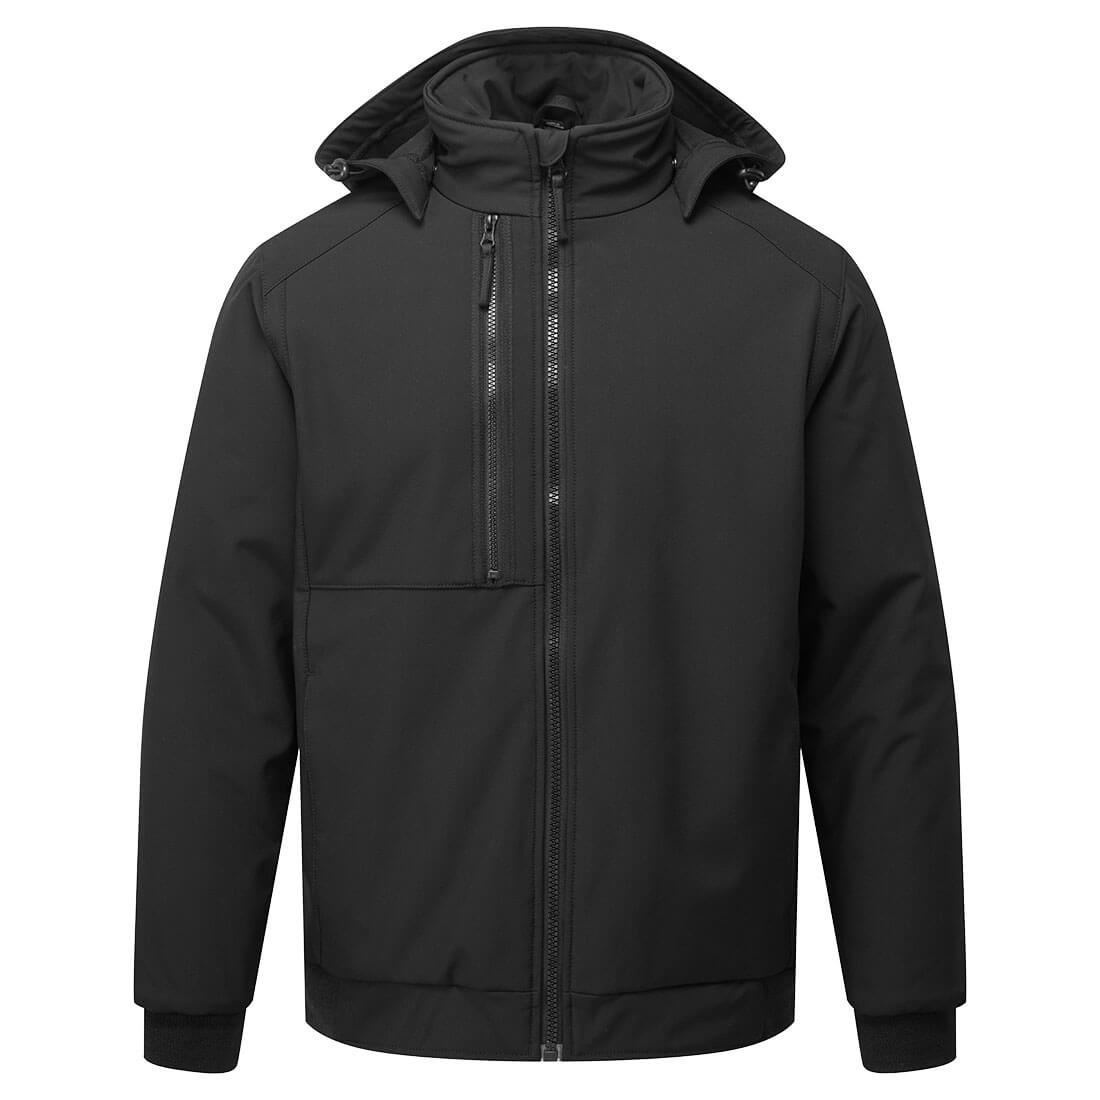 All Weather Protection, Softshell Jackets